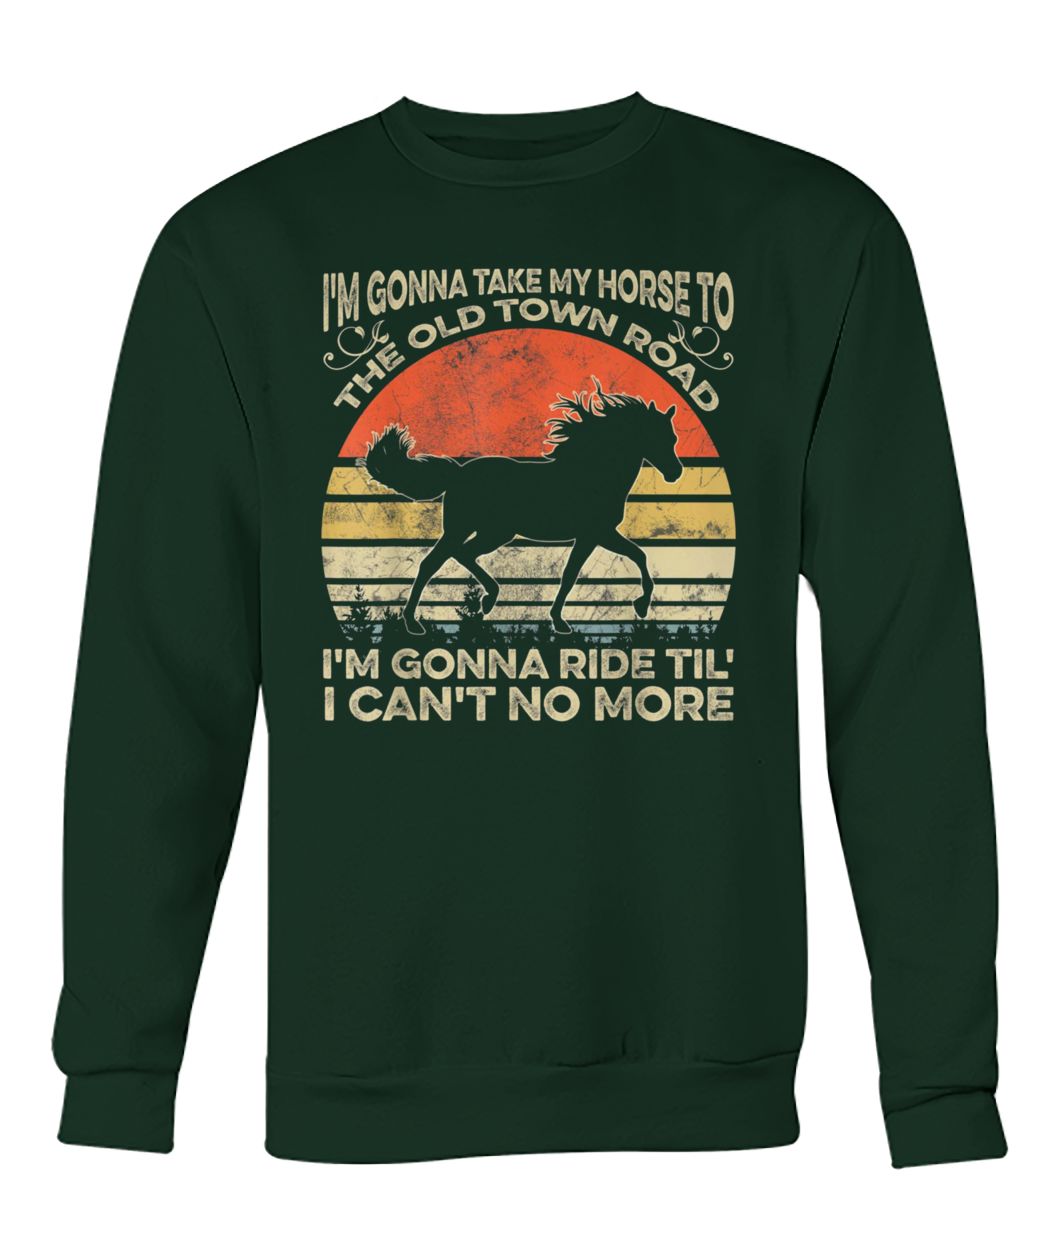 Vintage I'm gonna take my horse to the old town road crew neck sweatshirt